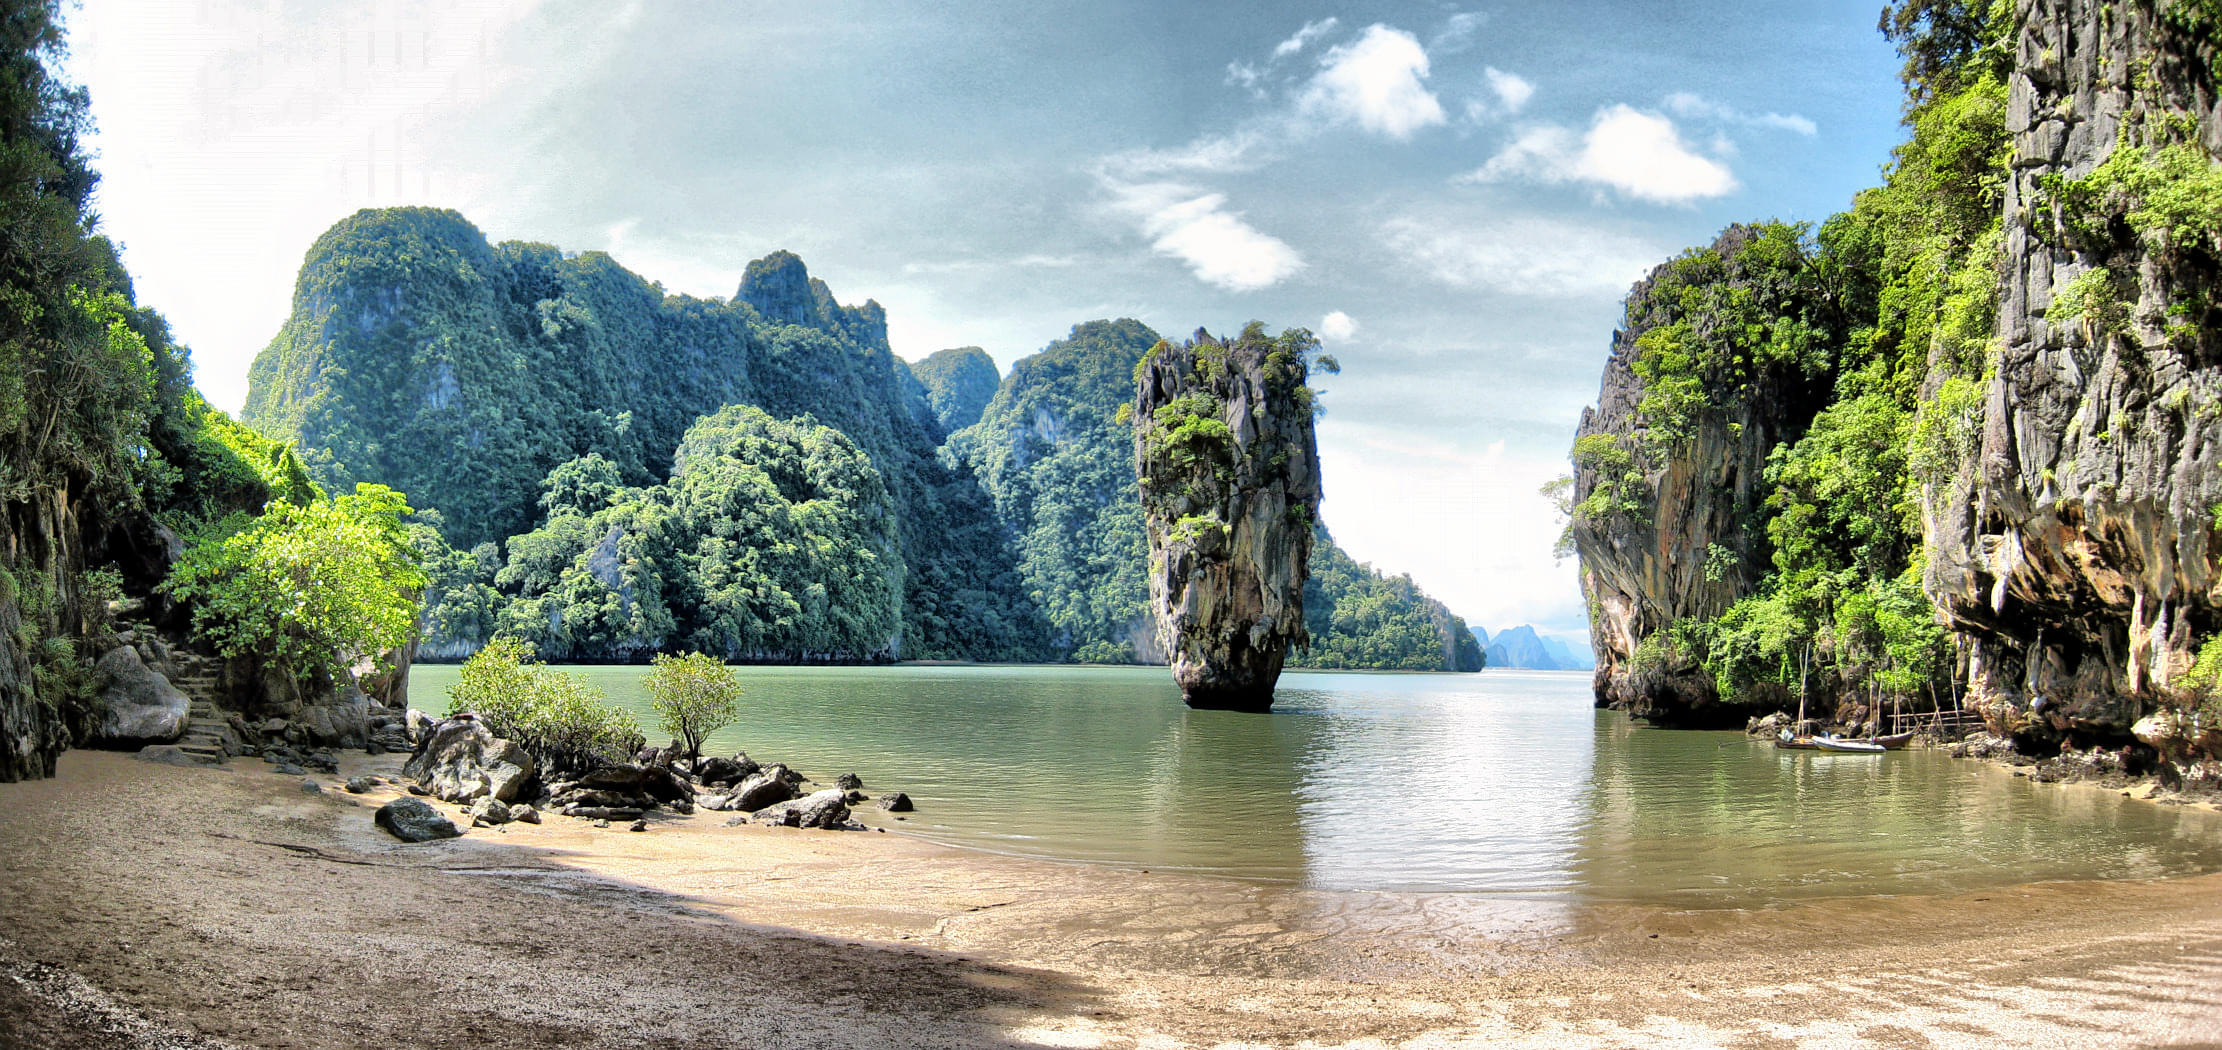 James Bond Island (Khao Phing Kan) Overview